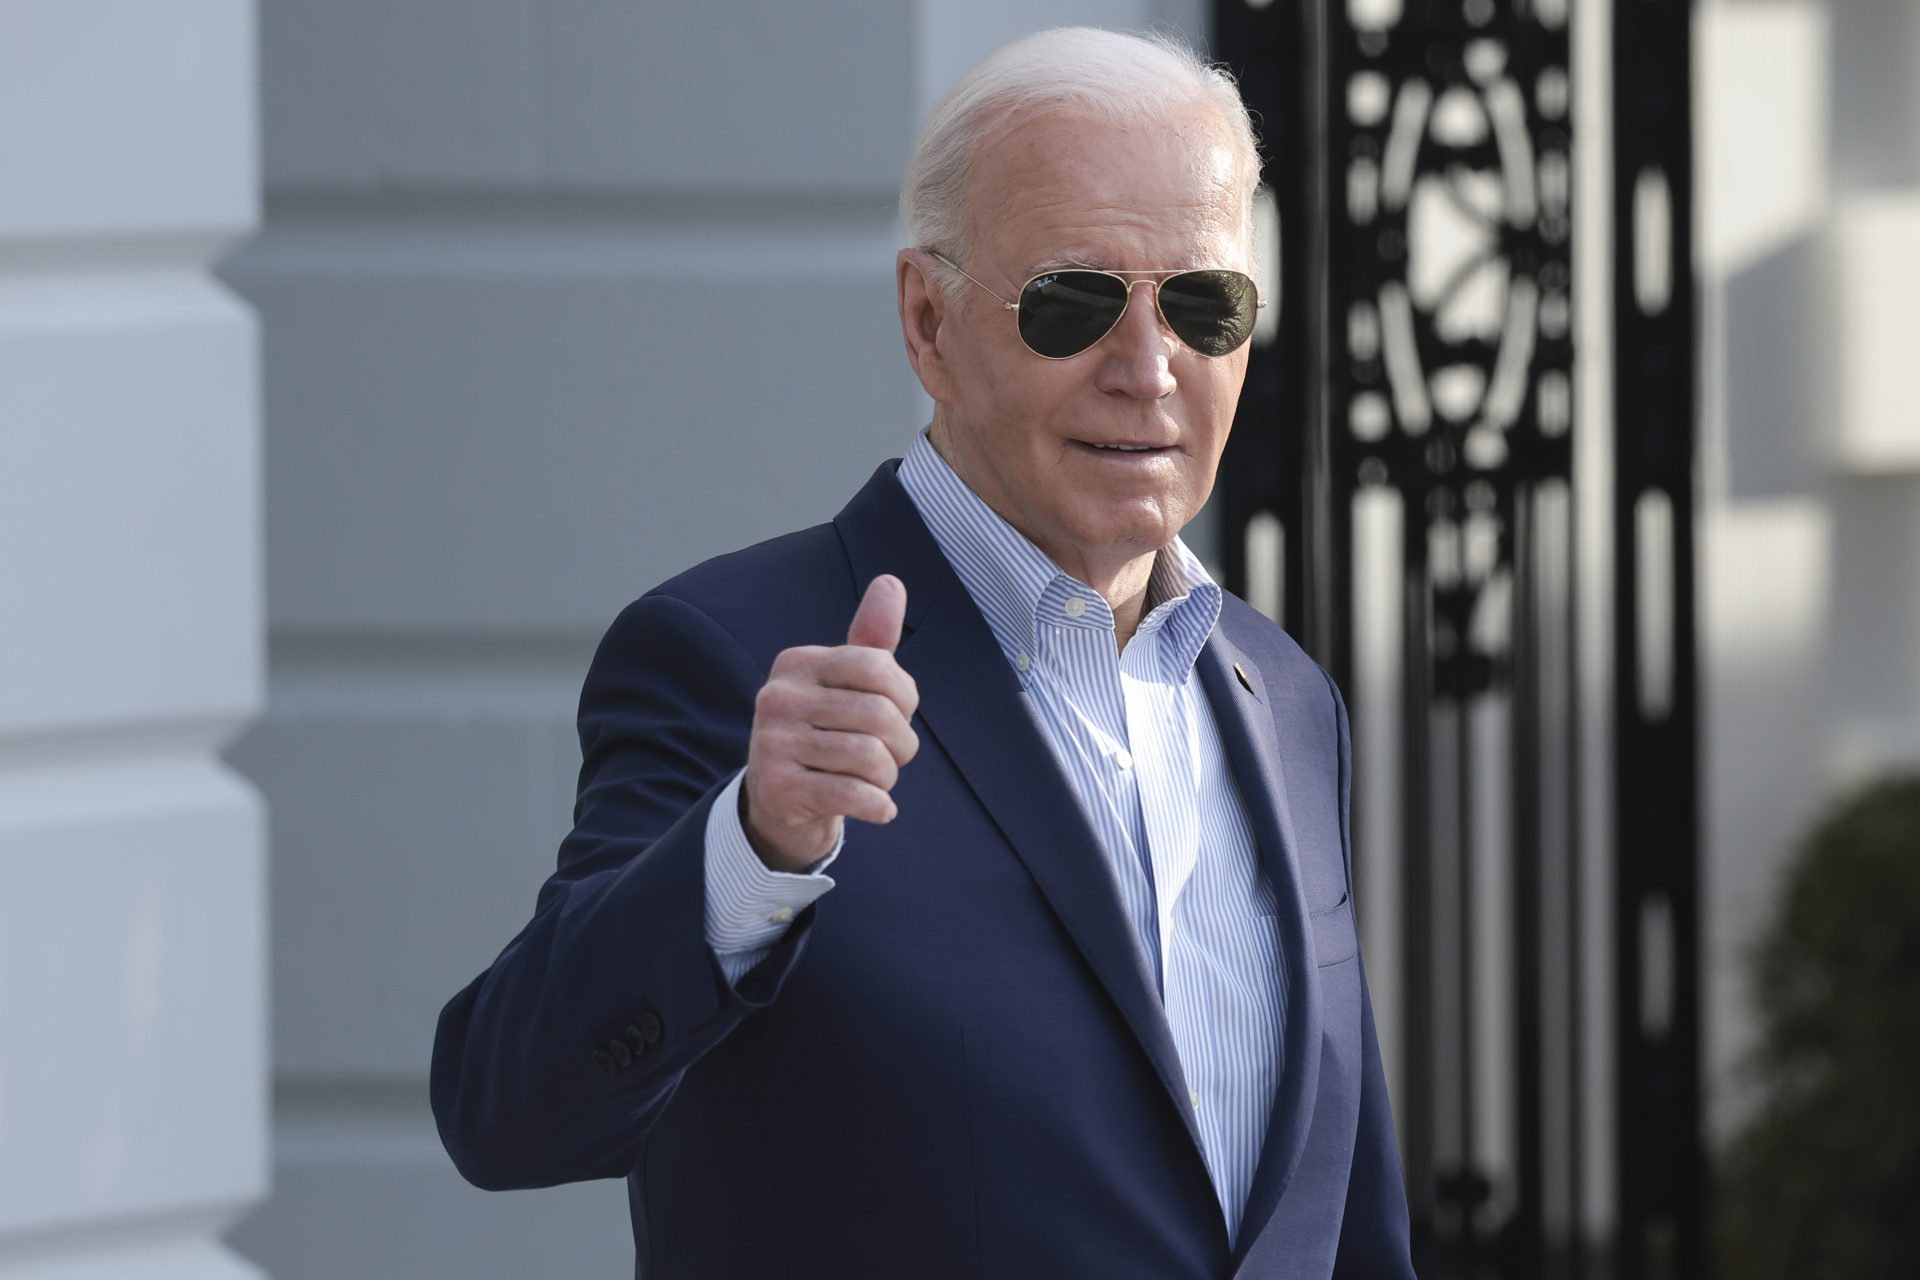 Biden has a new campaign strategy and it’s making Trump mad